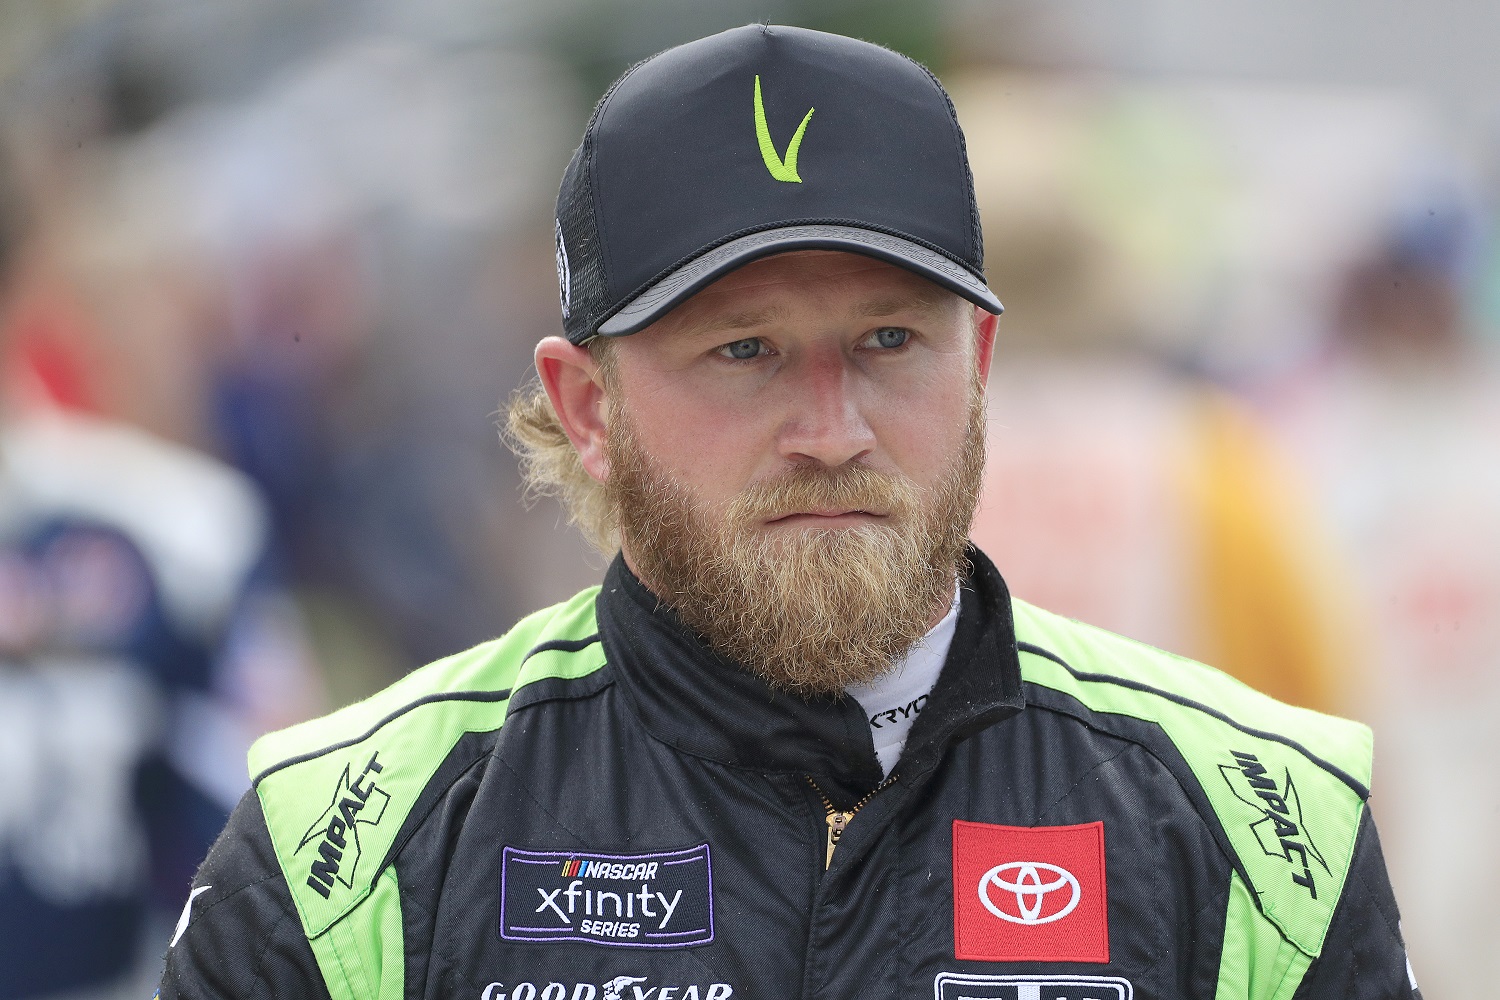 Jeffrey Earnhardt walks down pit road prior to the Xfinity Series Alsco Uniforms 250 on July 9, 2022, at Atlanta Motor Speedway. | David J. Griffin/Icon Sportswire via Getty Images